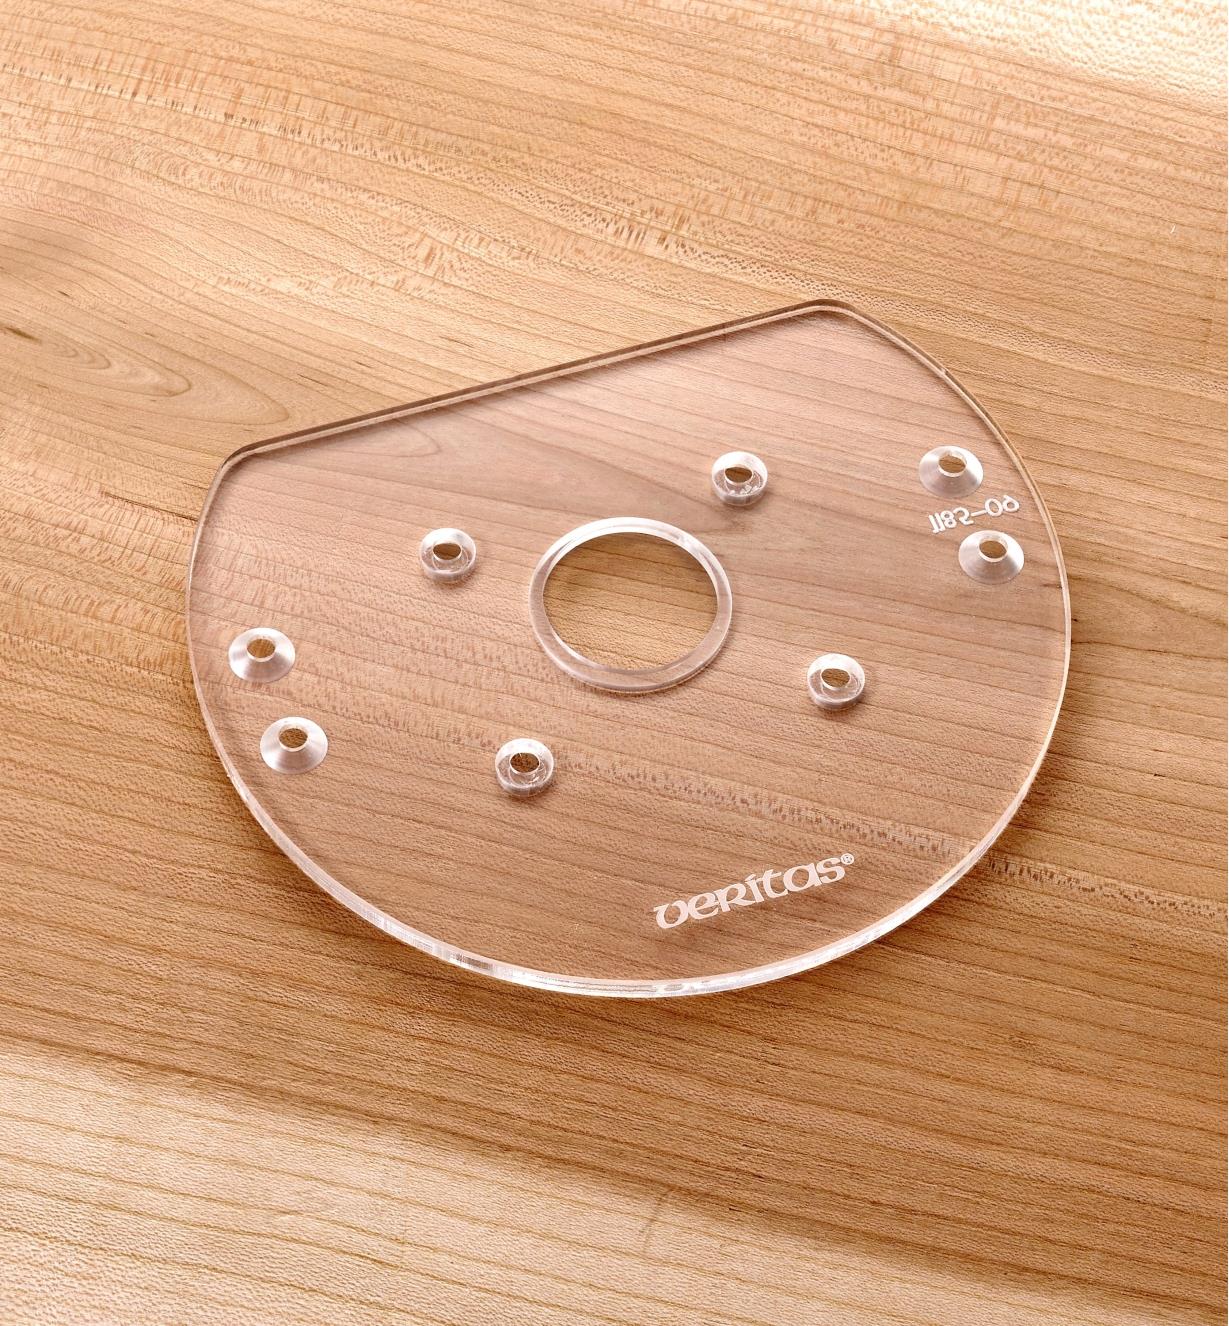 05J6605 - Compact Router Base Plate for Makita RT0701C